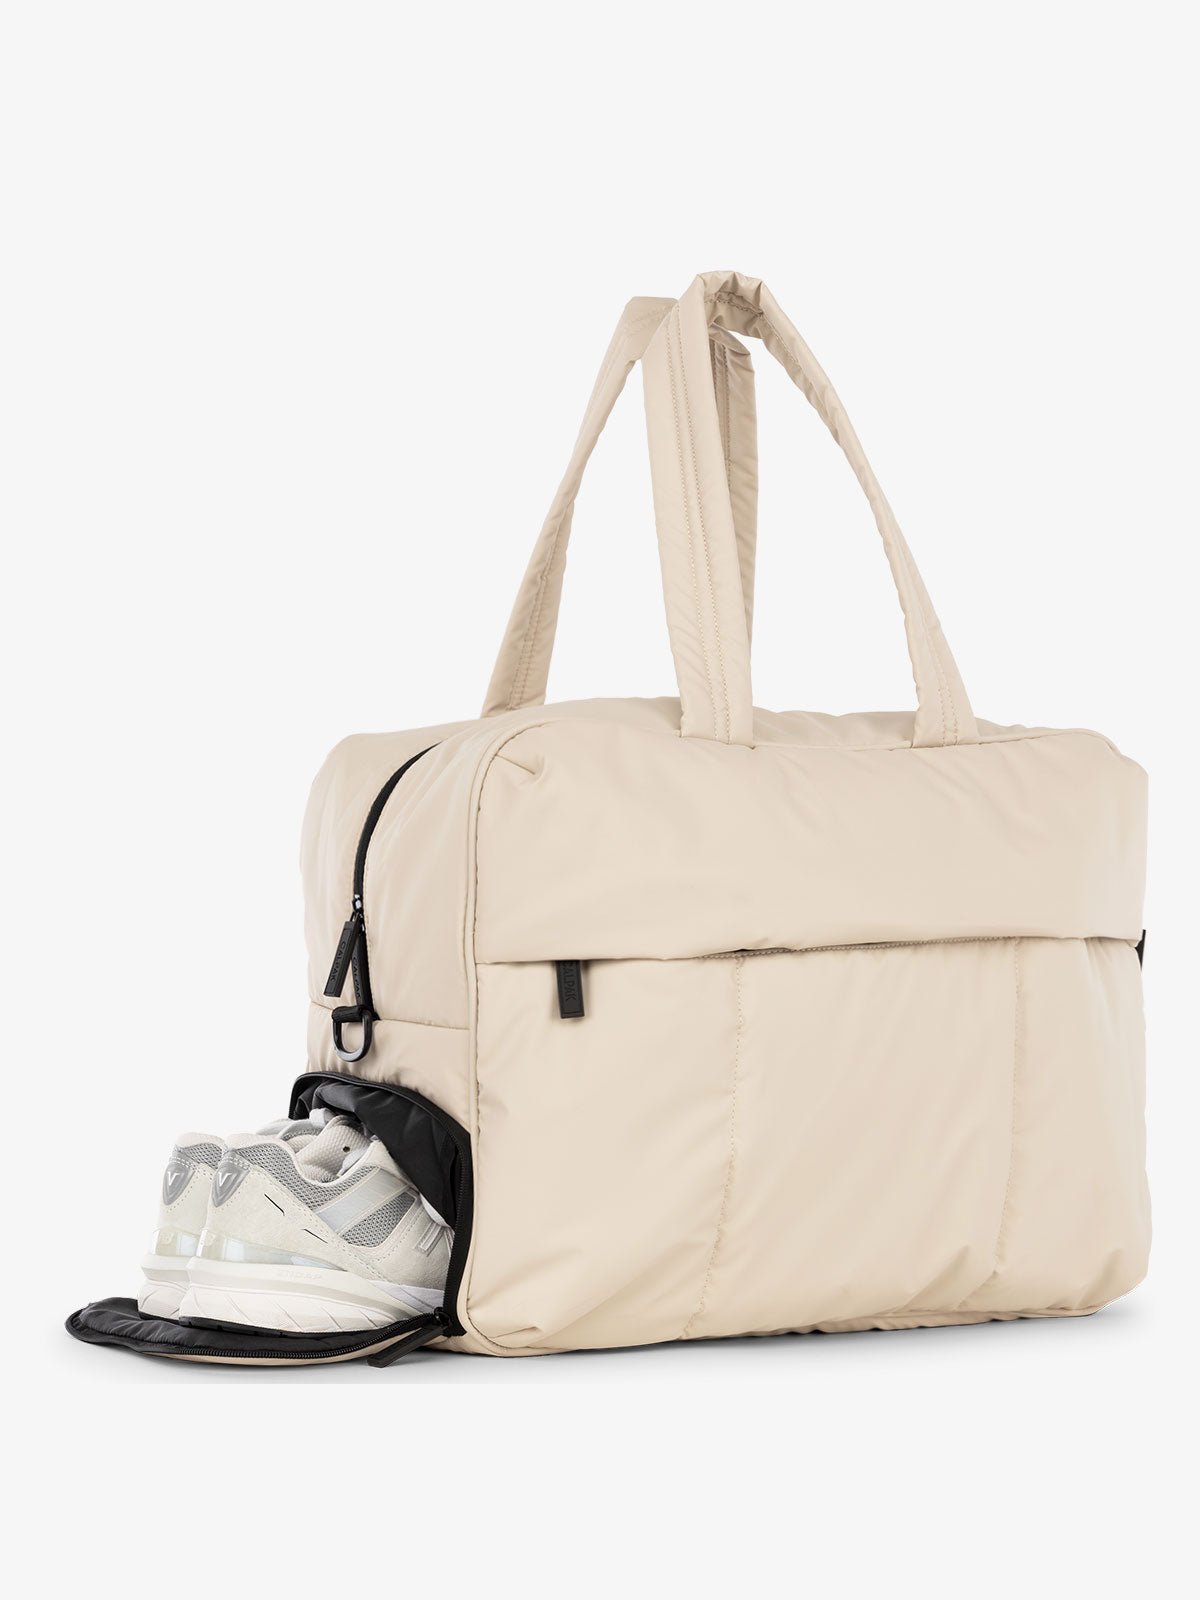 CALPAK Luka large duffel bag with side shoe compartment and dual handles in oatmeal